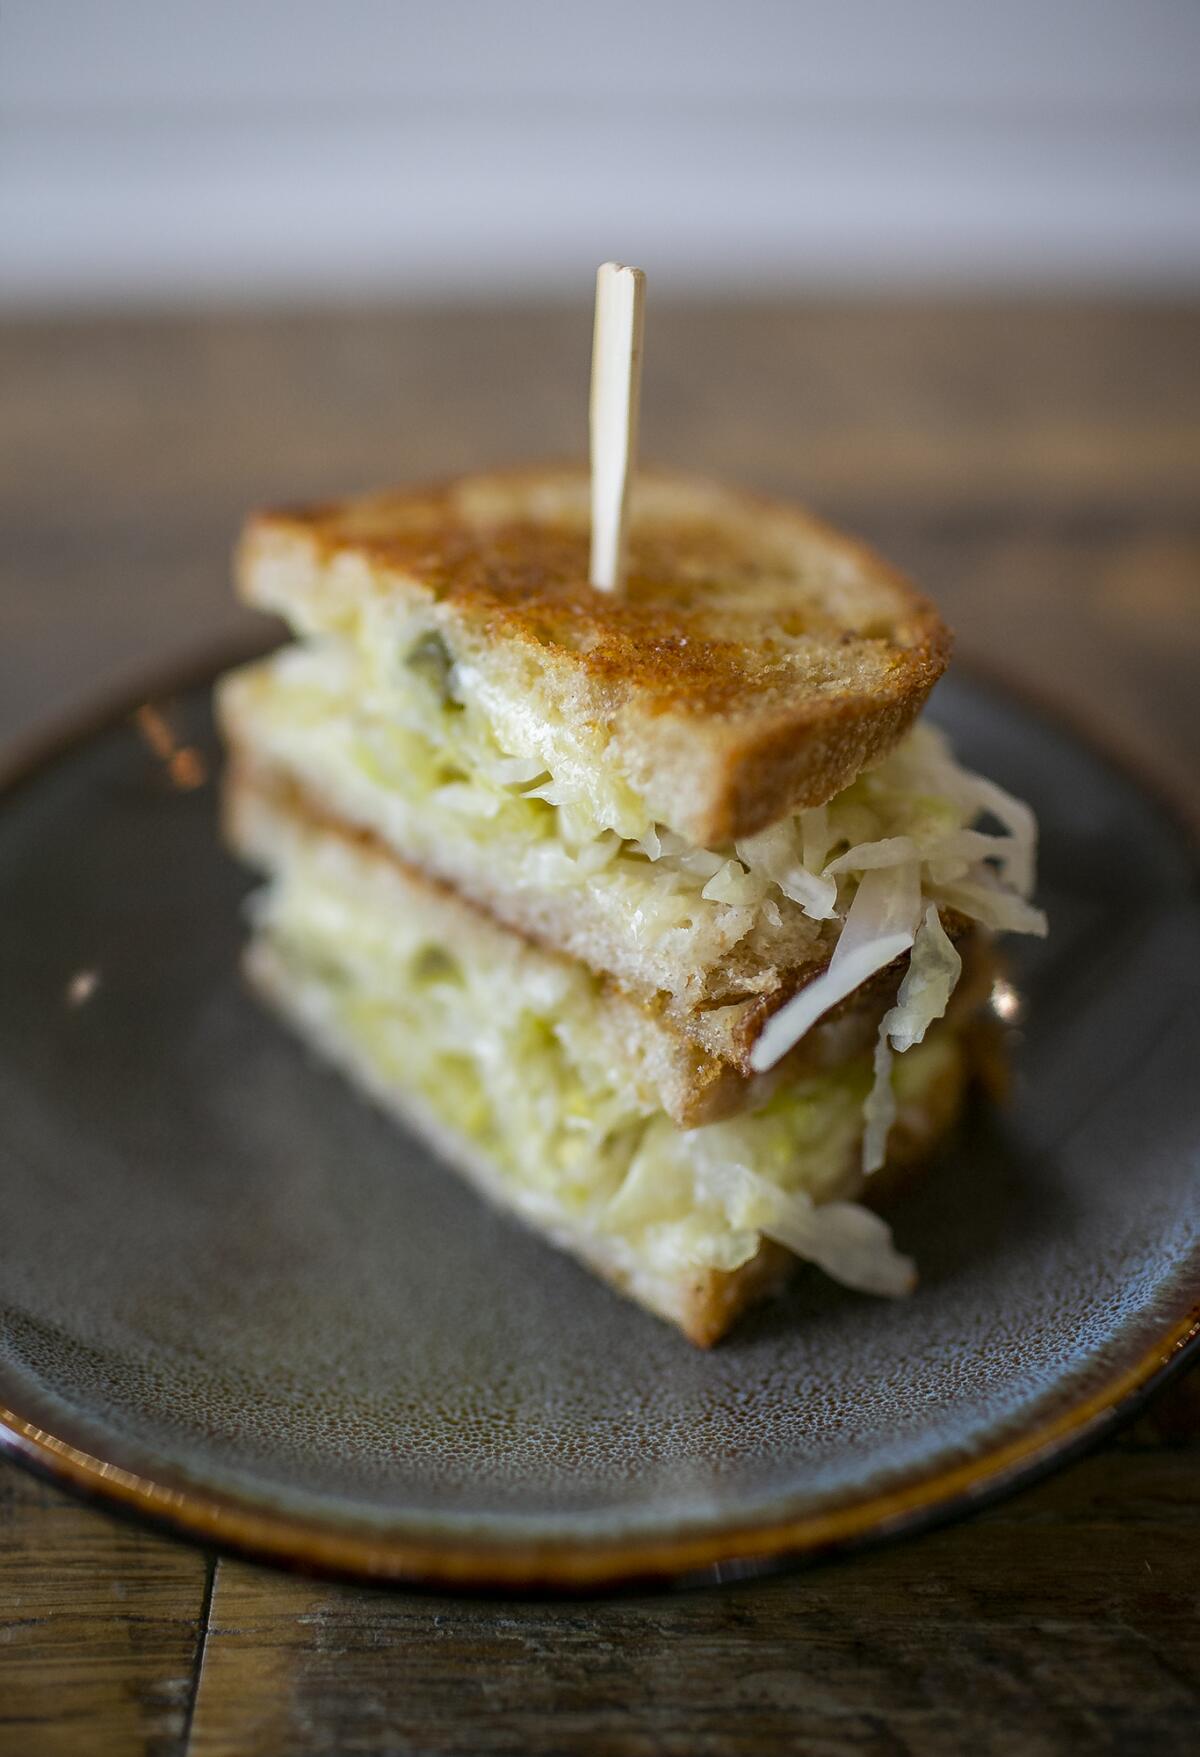 The Kraut grilled cheese with raw cheese and sourdough from the Fermentation Farm.